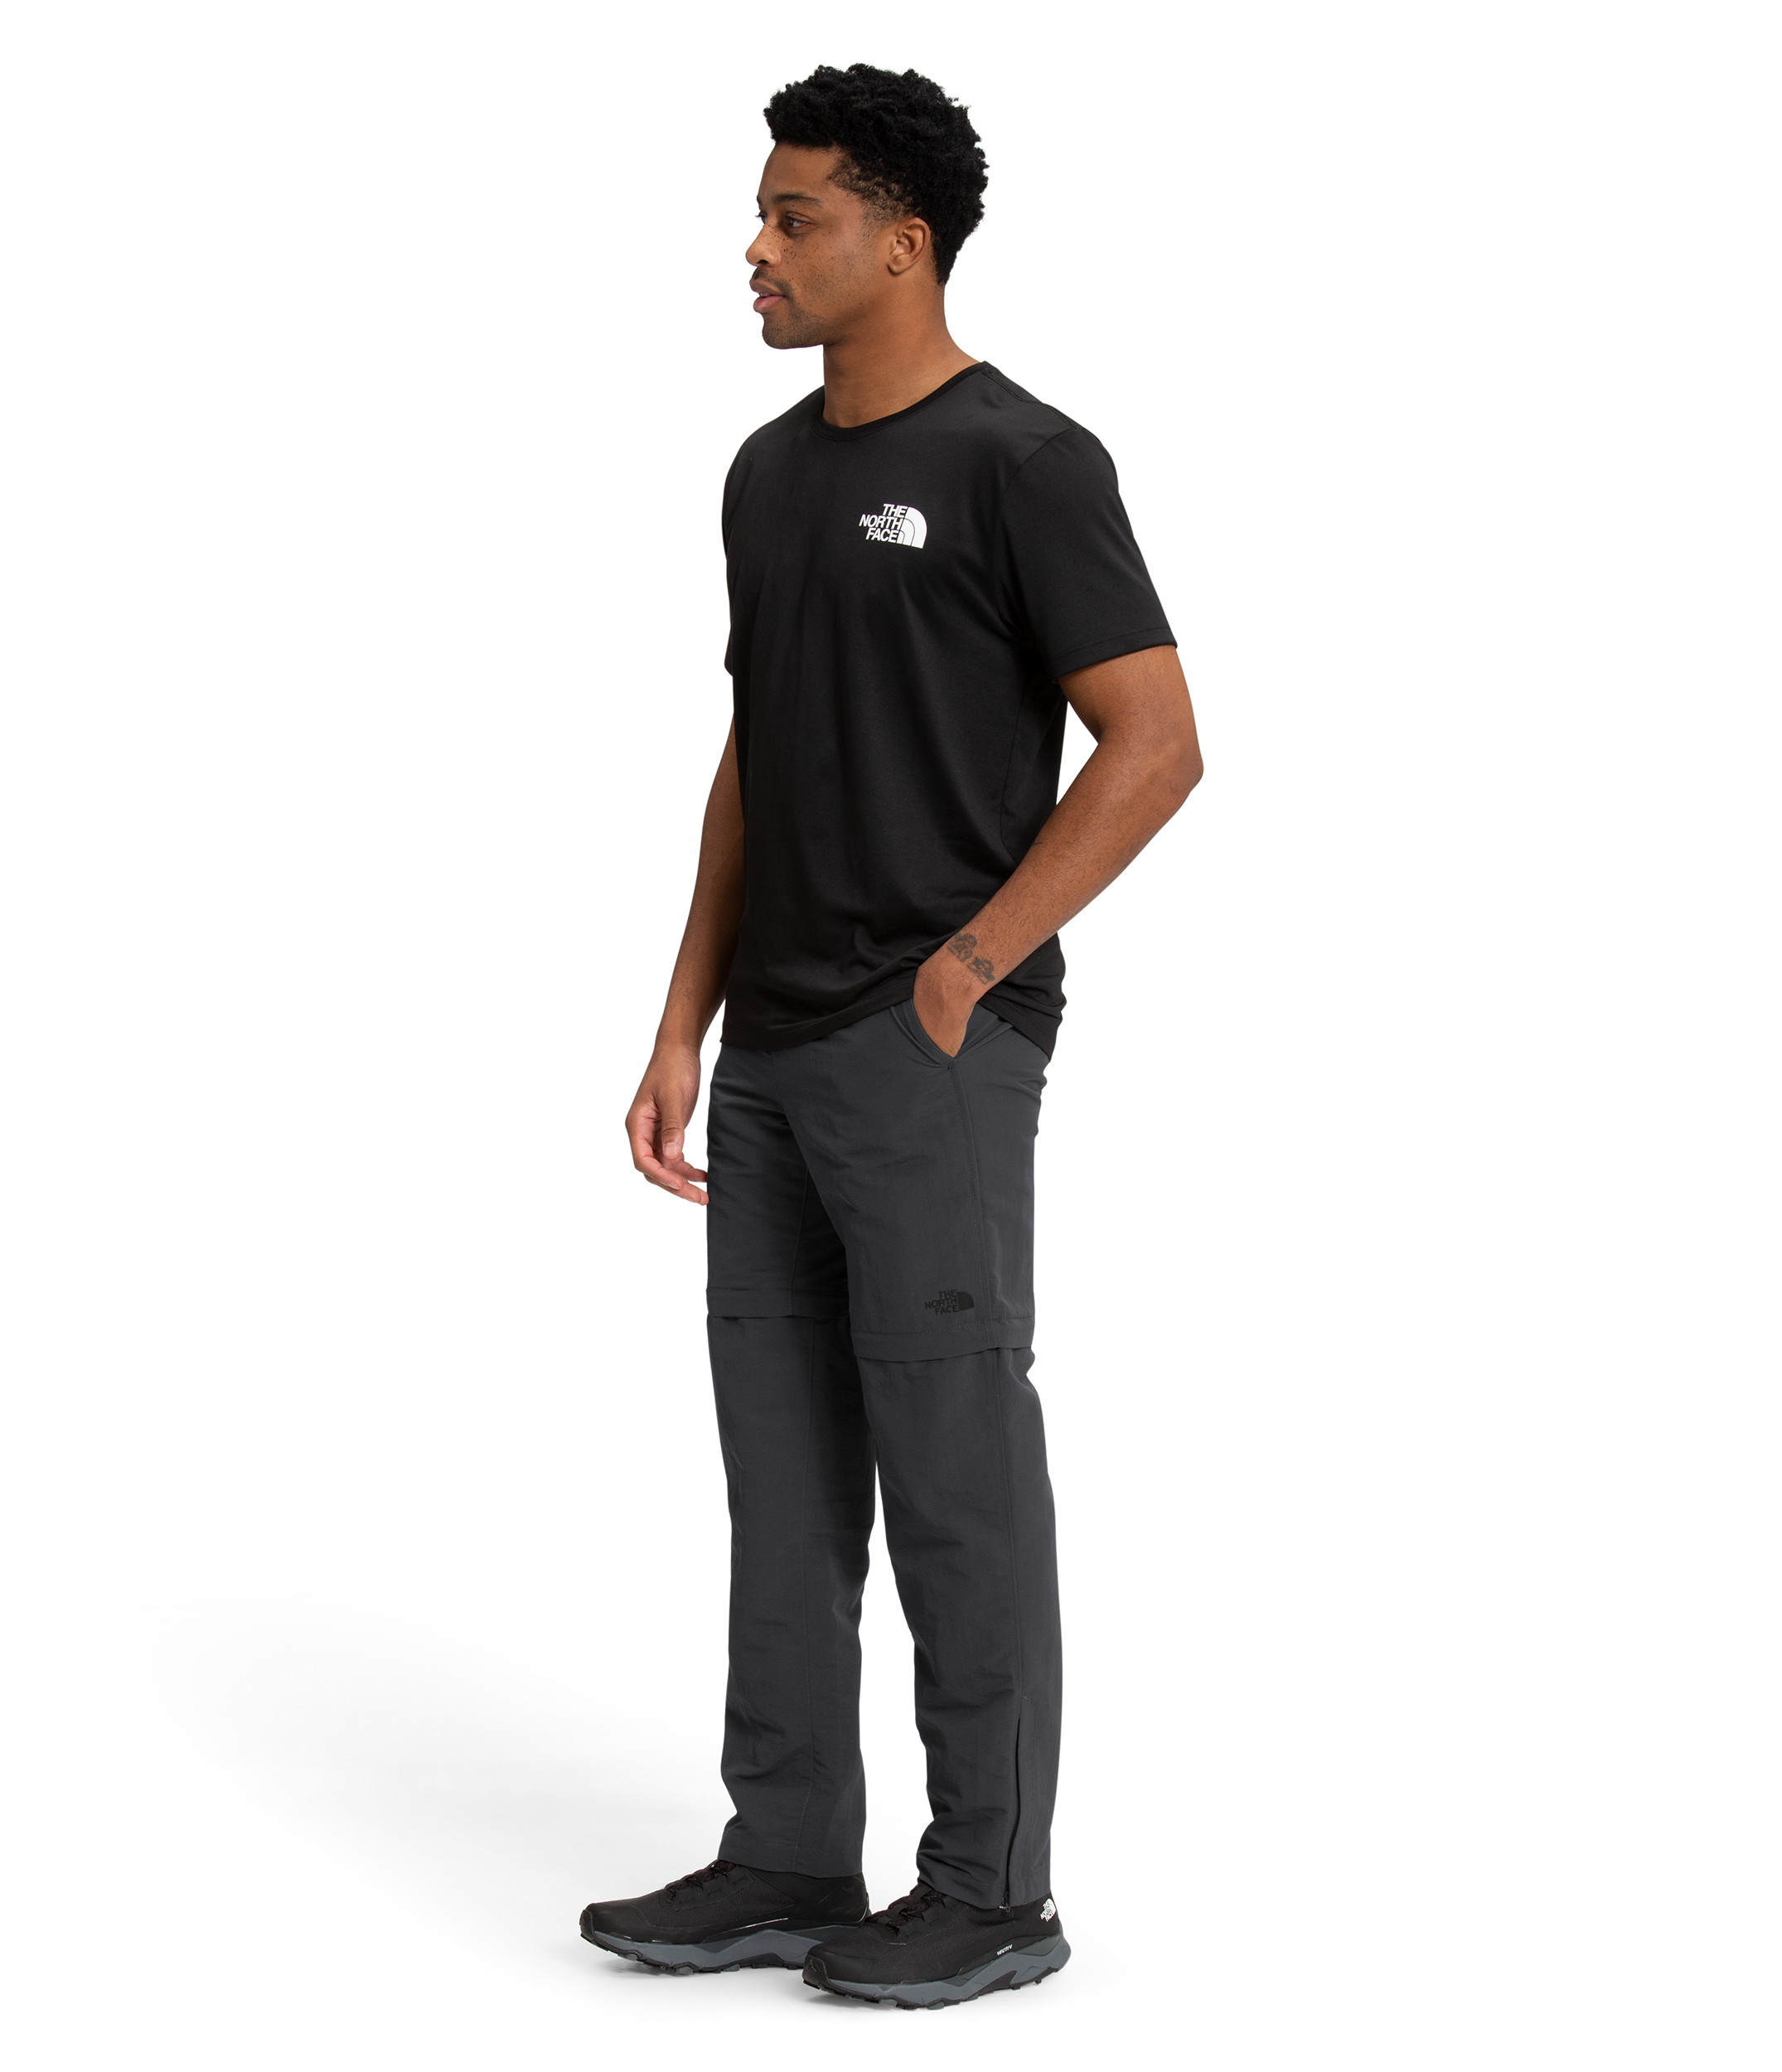 Explore the Outdoors with The North Face Paramount Trail Convertible Pant